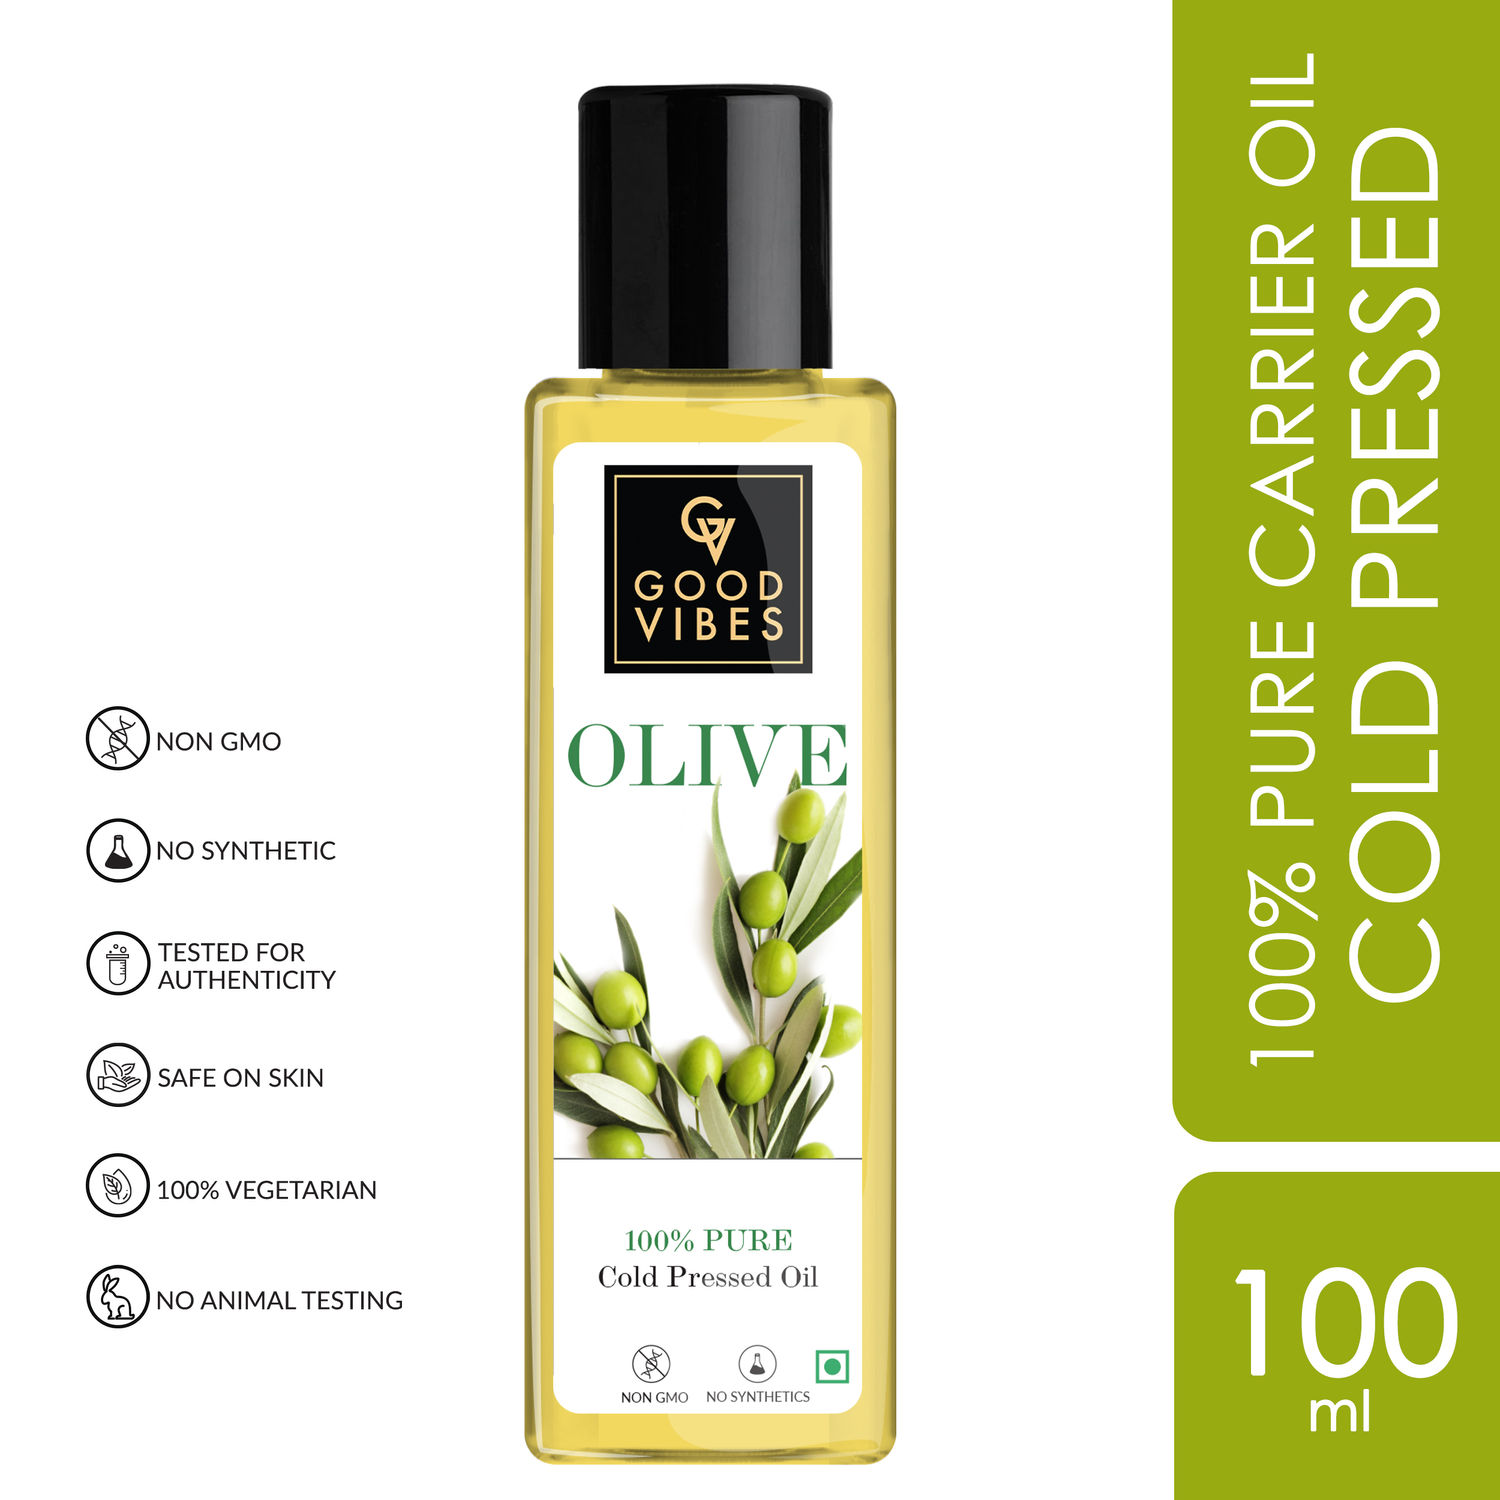 NEAR GENIUS WAYS TO USE OLIVE OIL FOR THE FACE